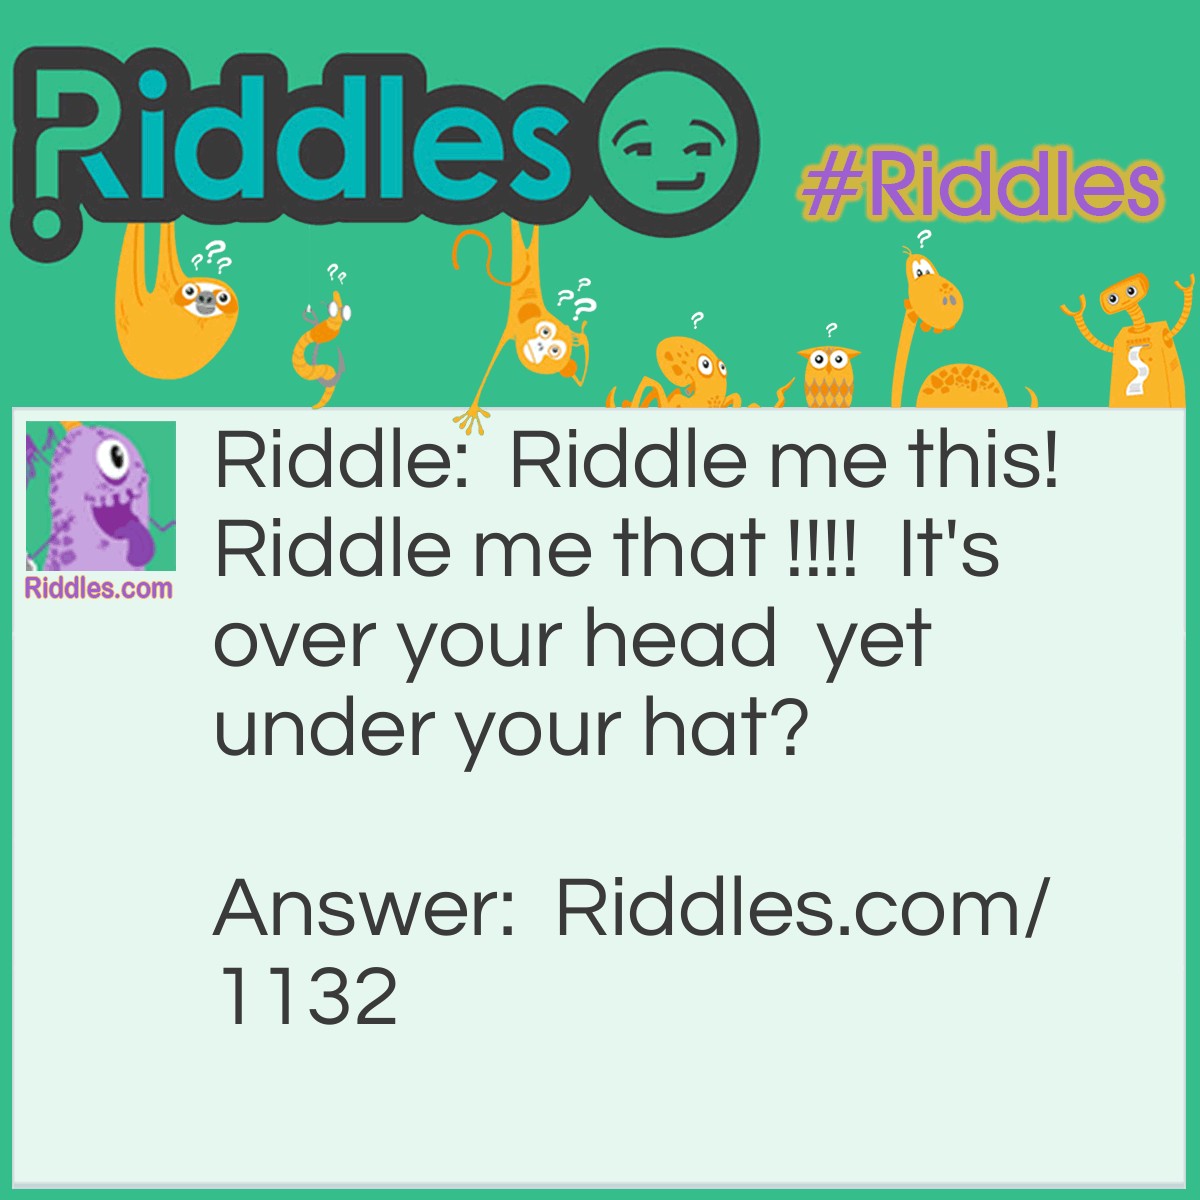 Riddle: <a href="https://www.riddles.com/2850">Riddle me this</a>.  Riddle me that.   It's over your head,   yet under your hat. What is it? Answer: Your hair.